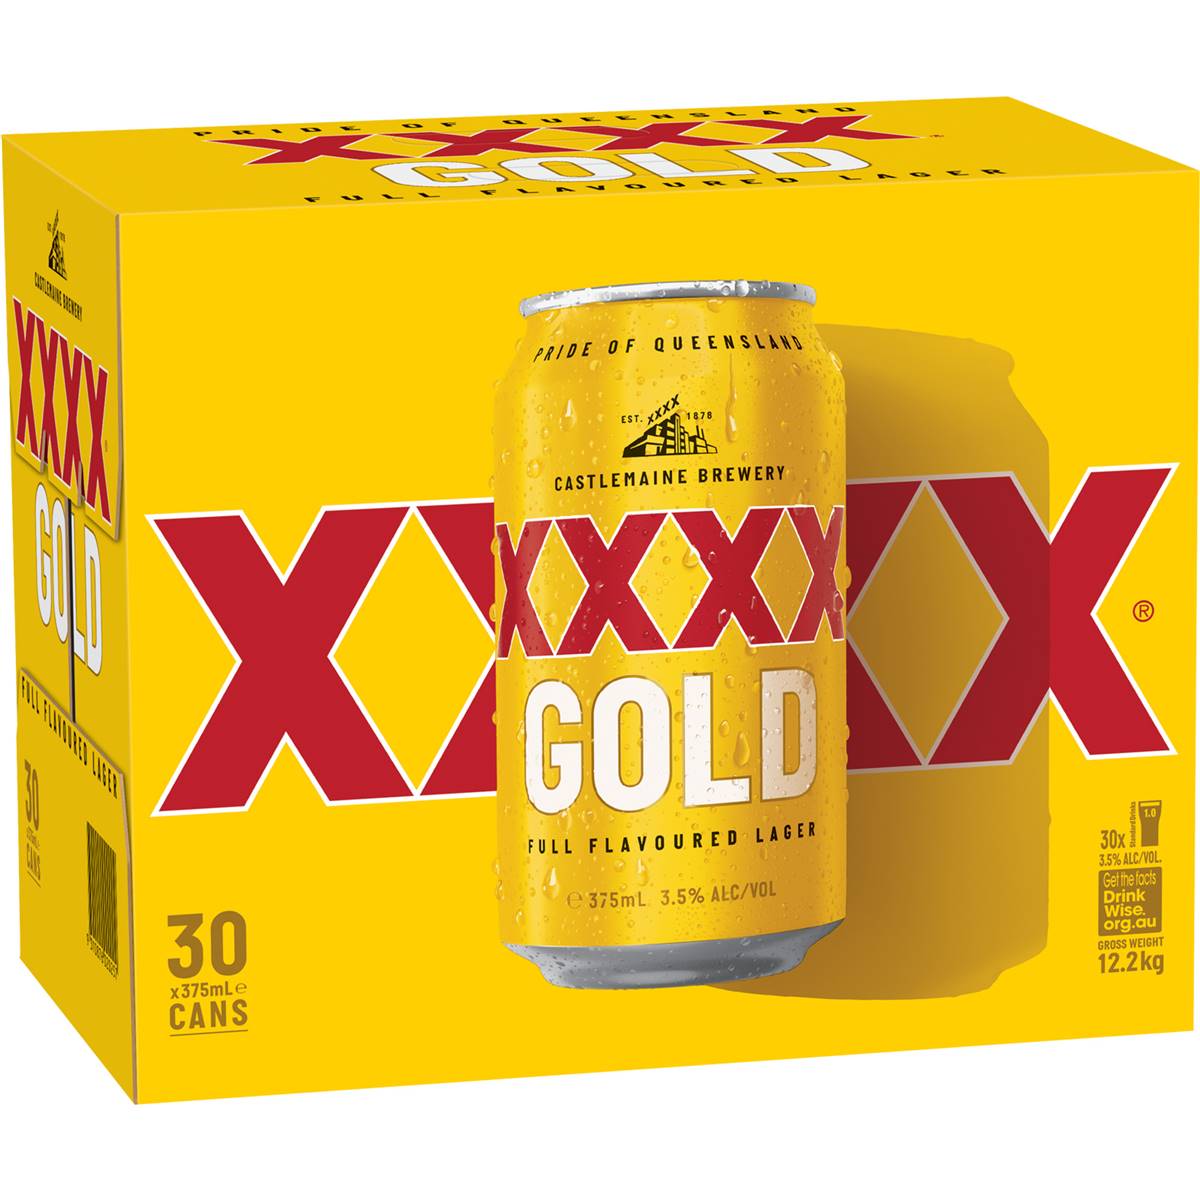 Calories in Xxxx Gold Mid Strength Lager Cans